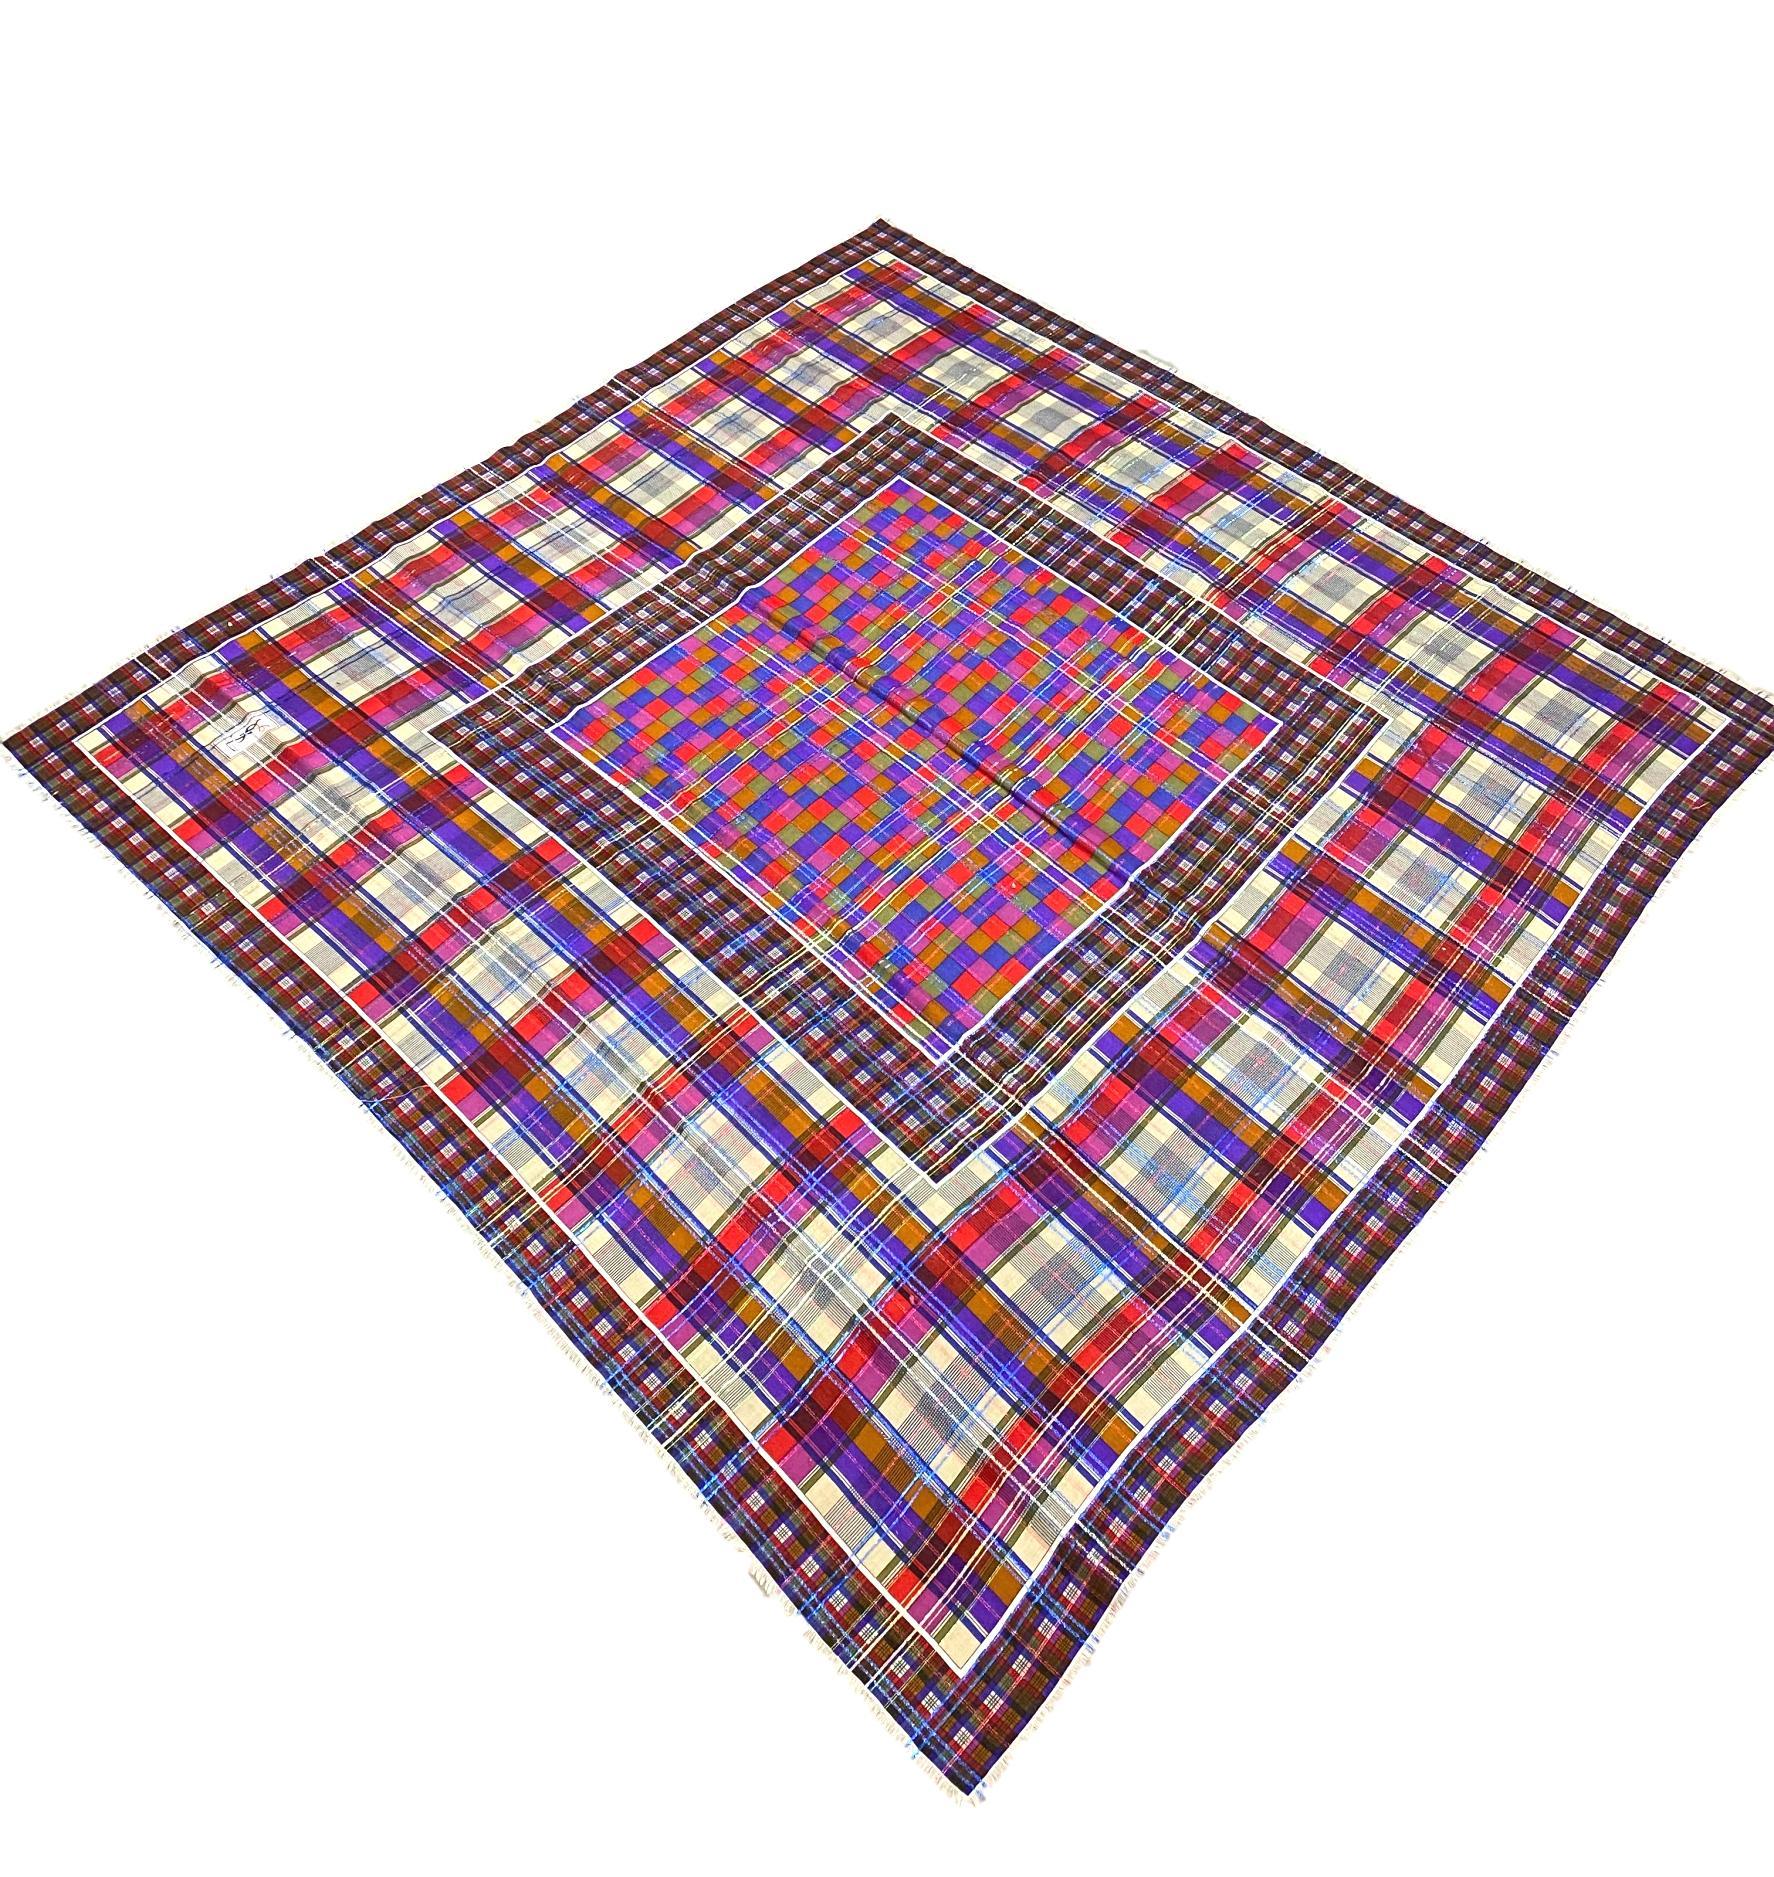 Yves Saint Laurent Vintage Wool Challis & Silk Checkered Plaid Pattern Scarf, Circa 1970 - 1980. This beautiful and classic plaid patterned scarf by Yves Saint Laurent comes in a vibrant magenta, red and purple coloration cross-sectioned with blue